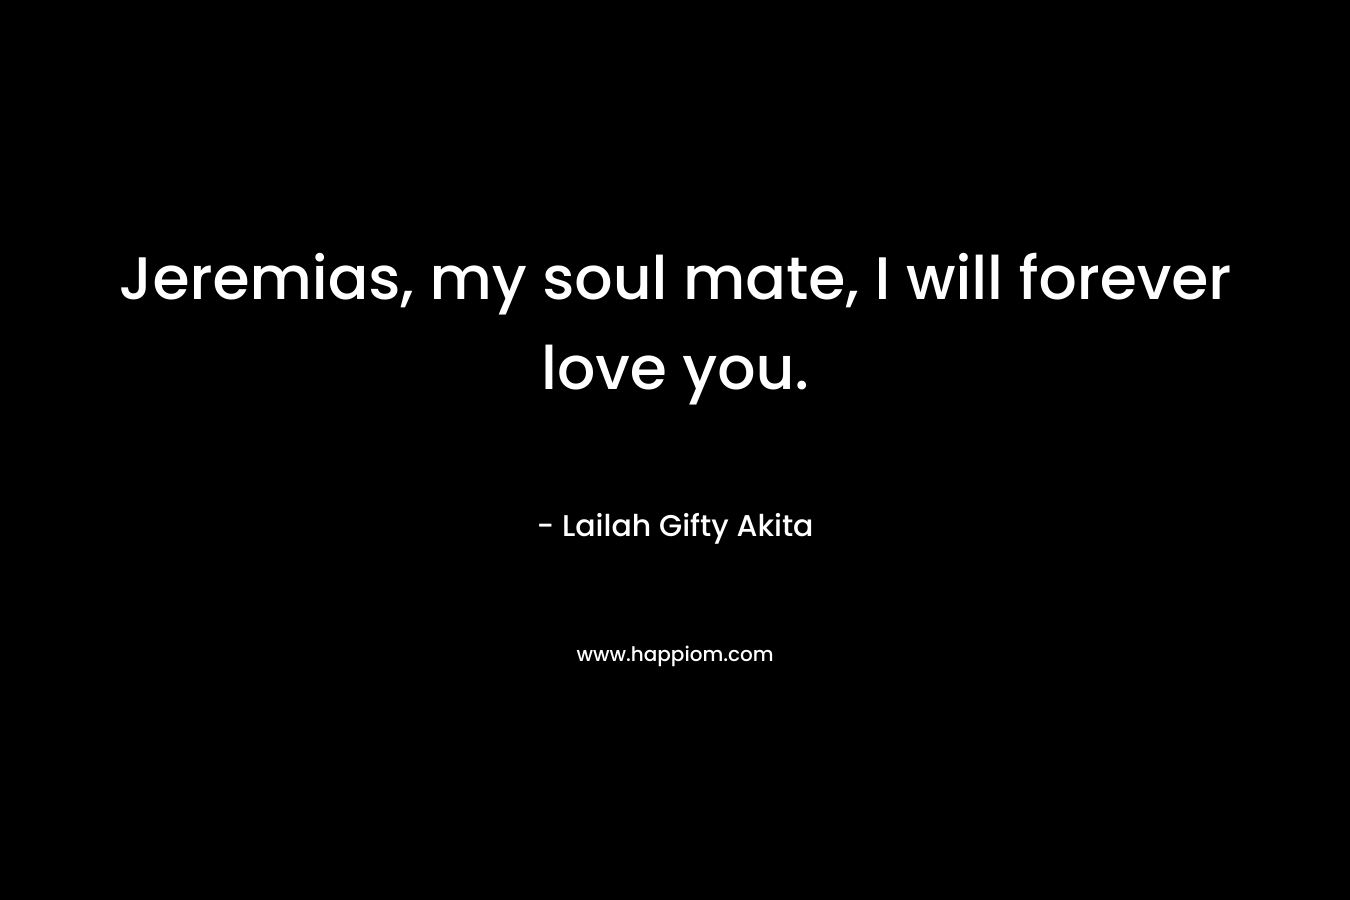 Jeremias, my soul mate, I will forever love you. – Lailah Gifty Akita